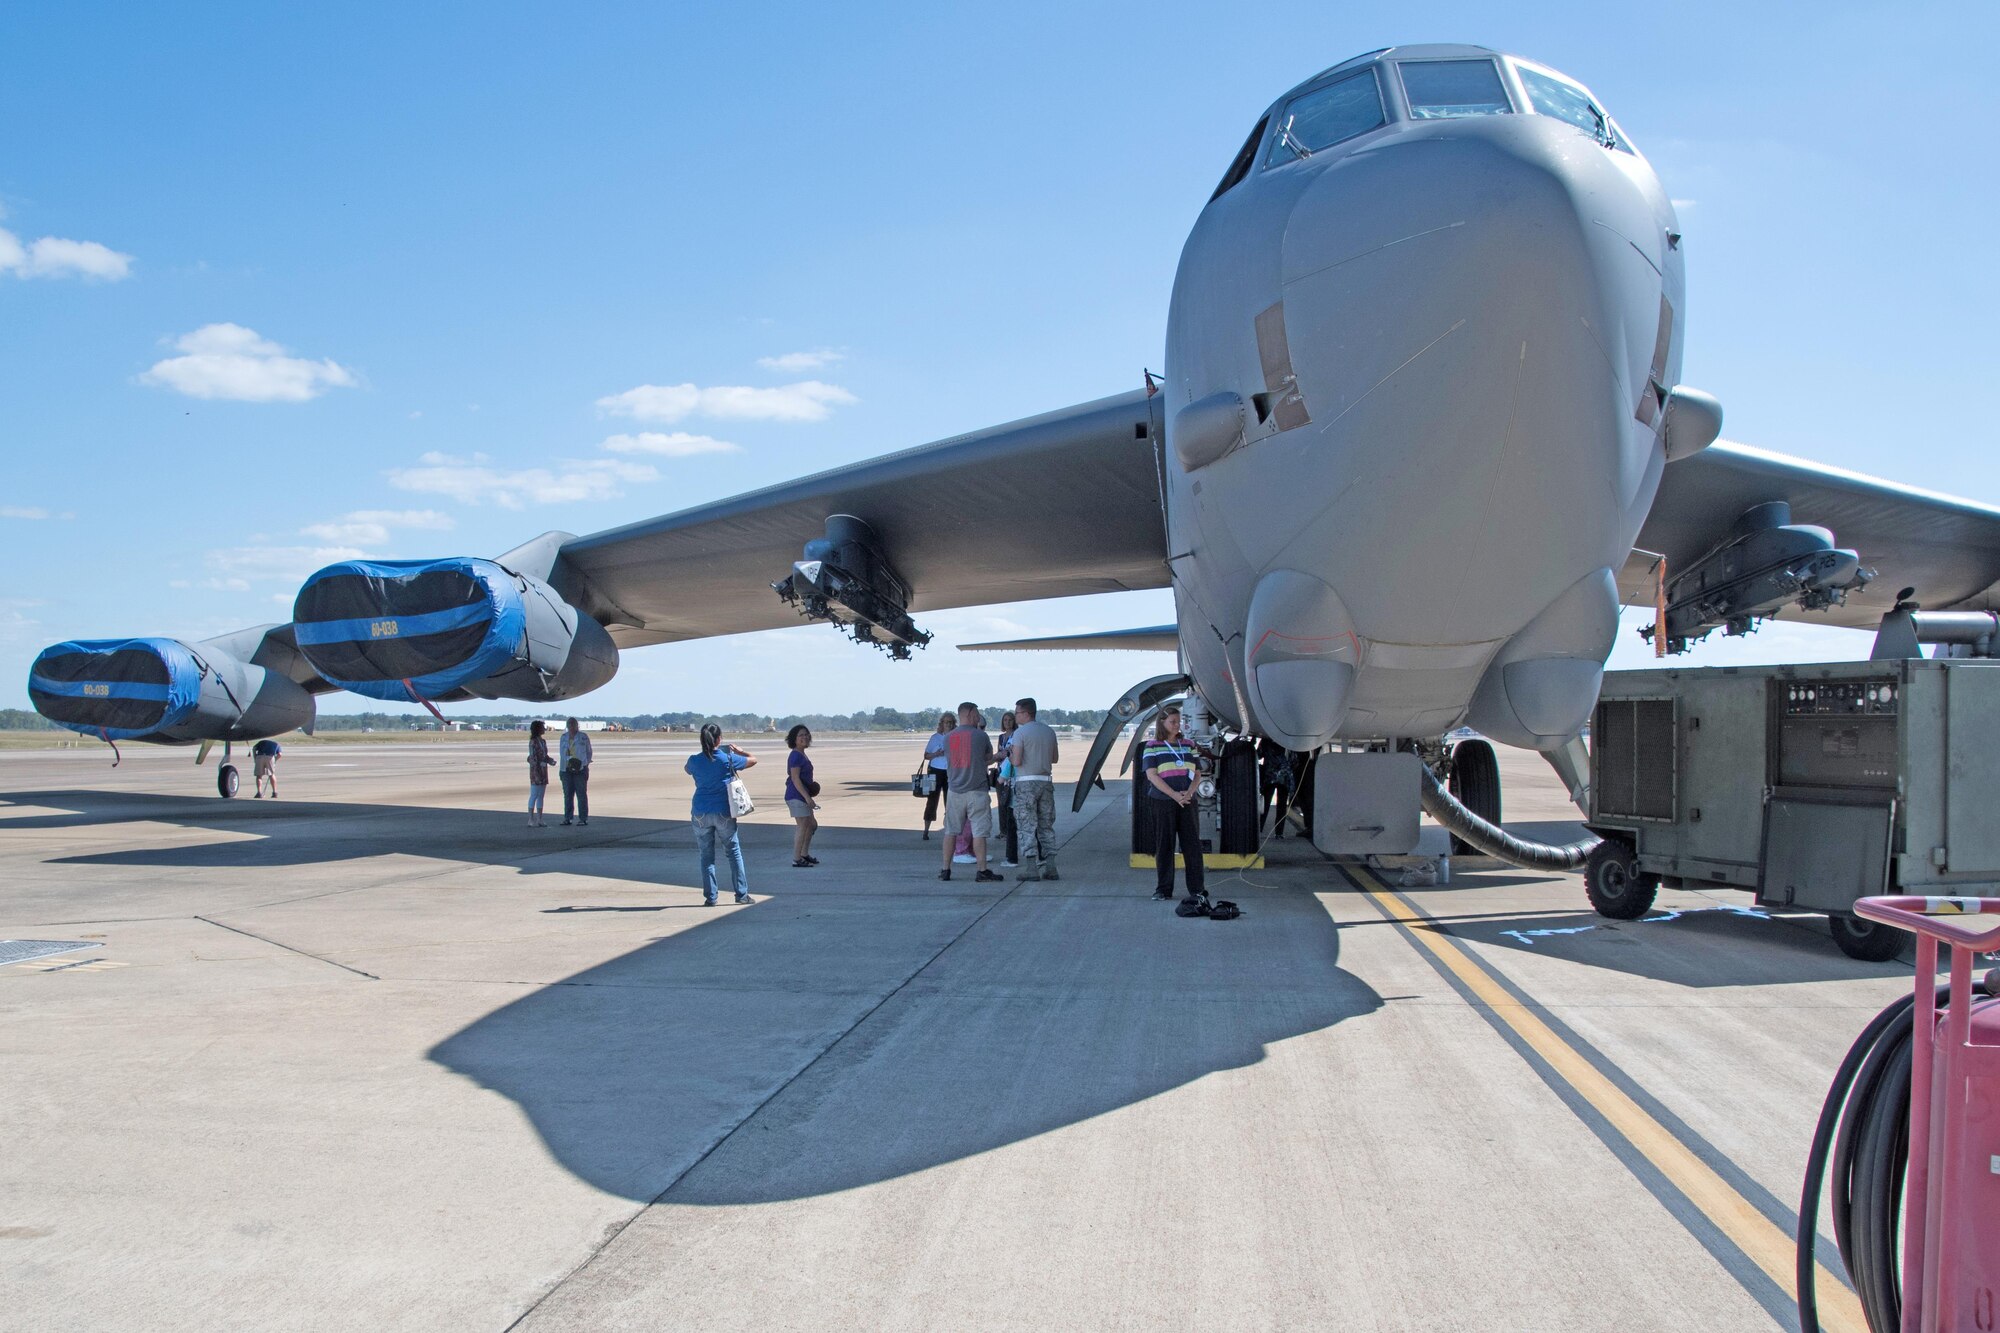 Airmen from the 307th Bomb Wing answer questions and point out features of the B-52 Stratofortress during a tour for the Shreveport Chapter of Ninety-Nines on Barksdale Air Force Base, La. Oct. 6, 2017.